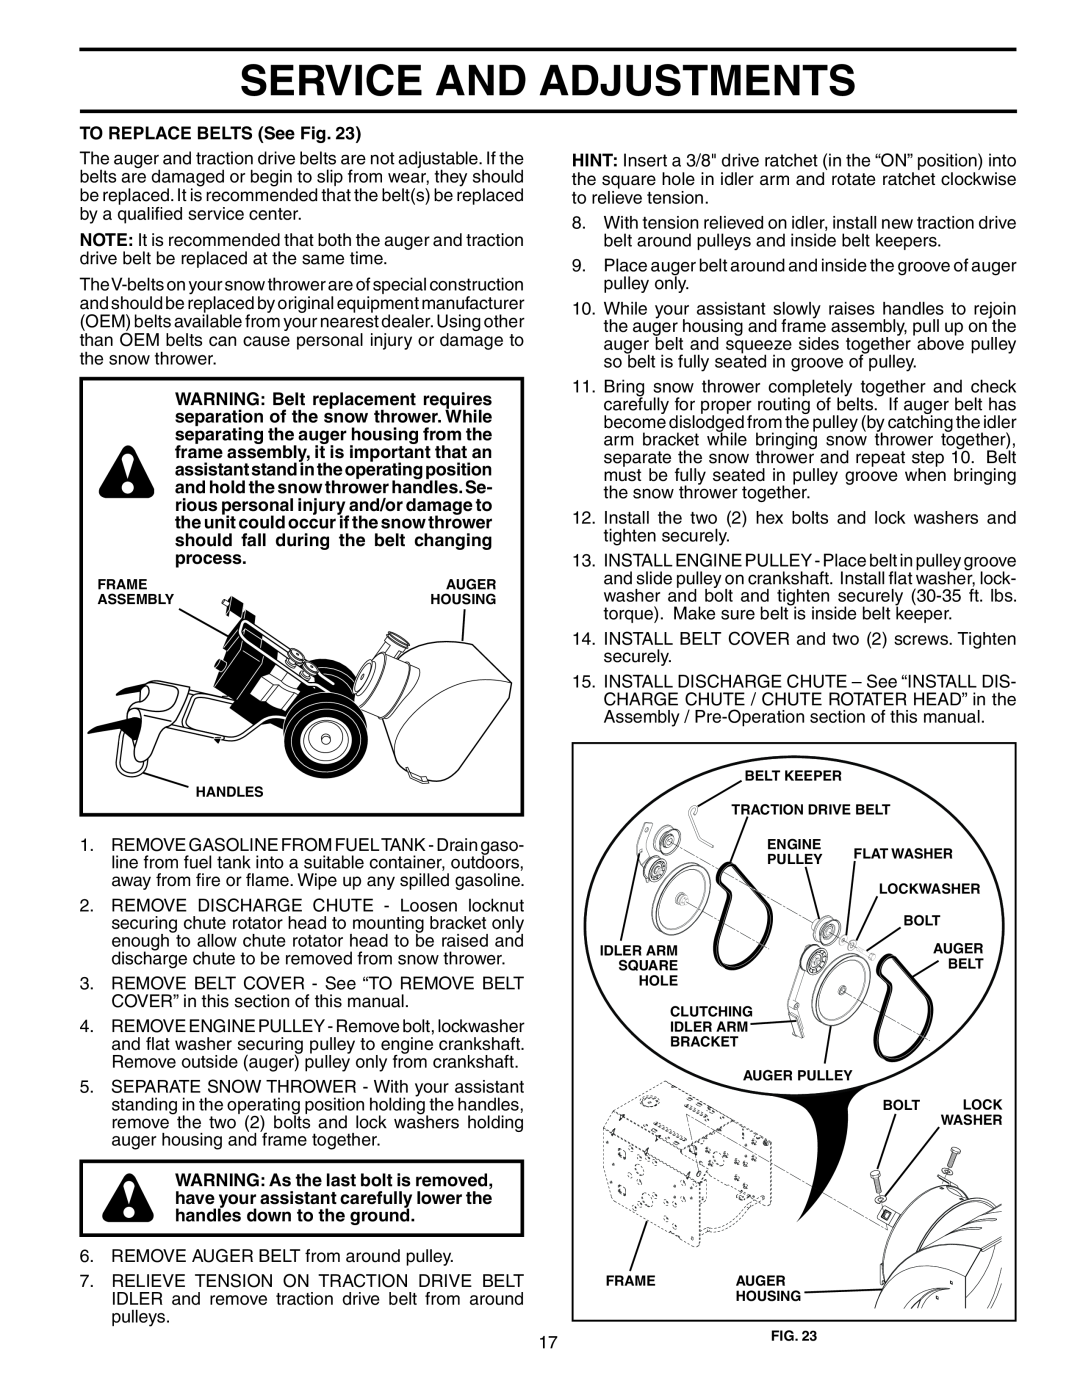 Husqvarna 10527STE owner manual Service And Adjustments, TO REPLACE BELTS See Fig 